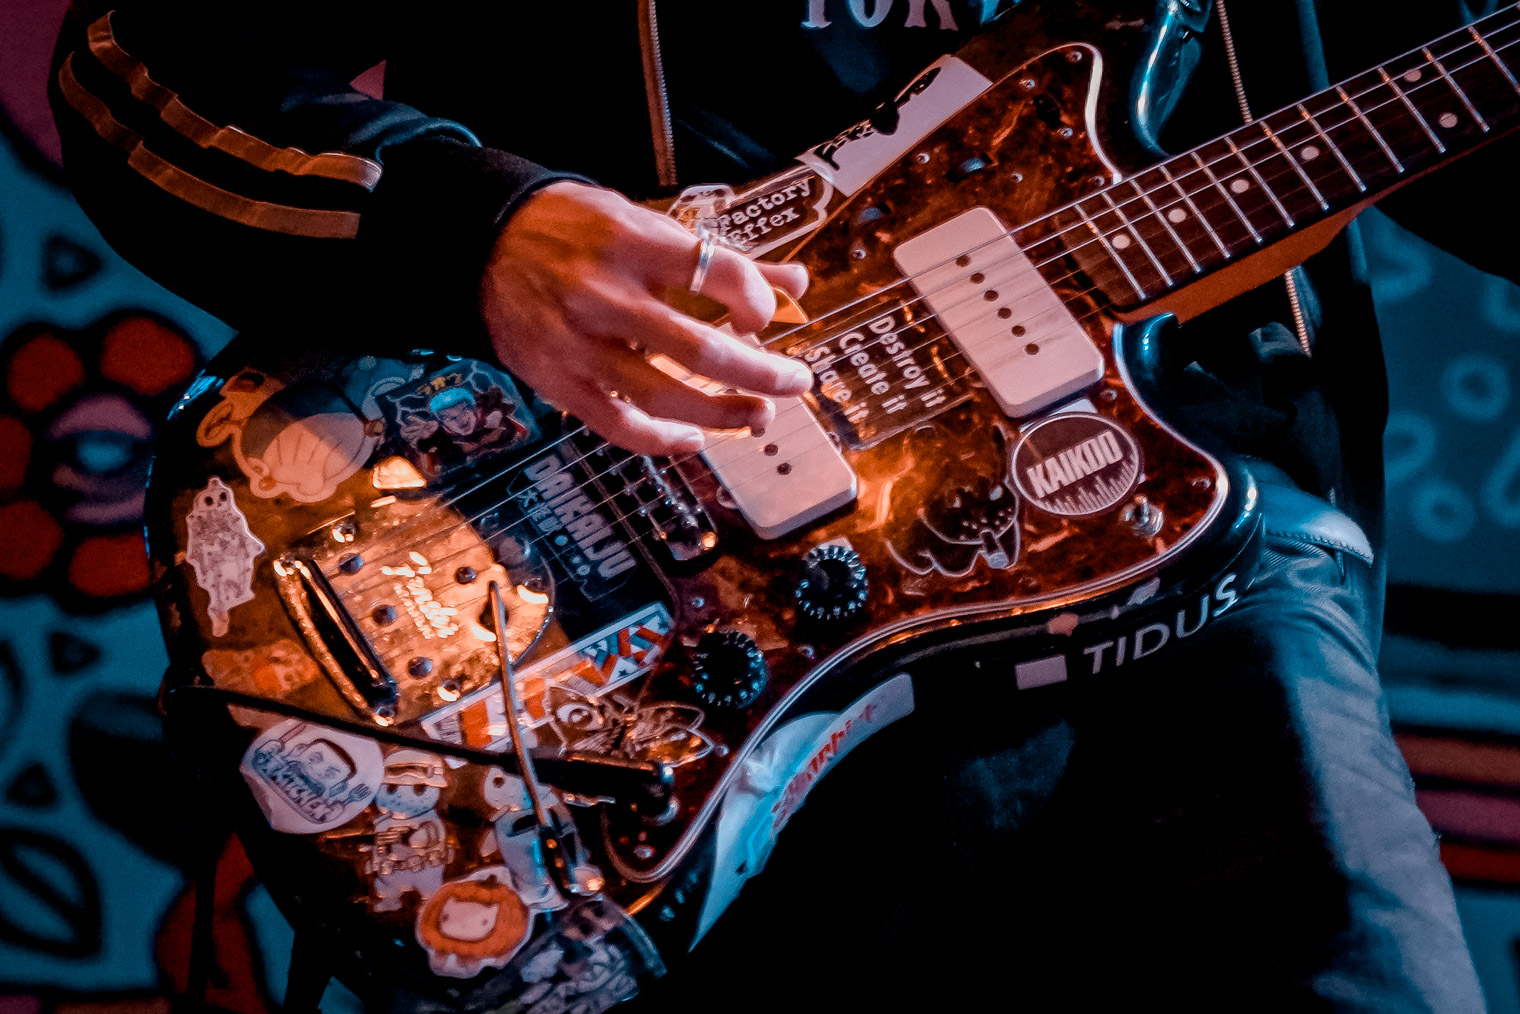 A close up of a guitar with many stickers on it